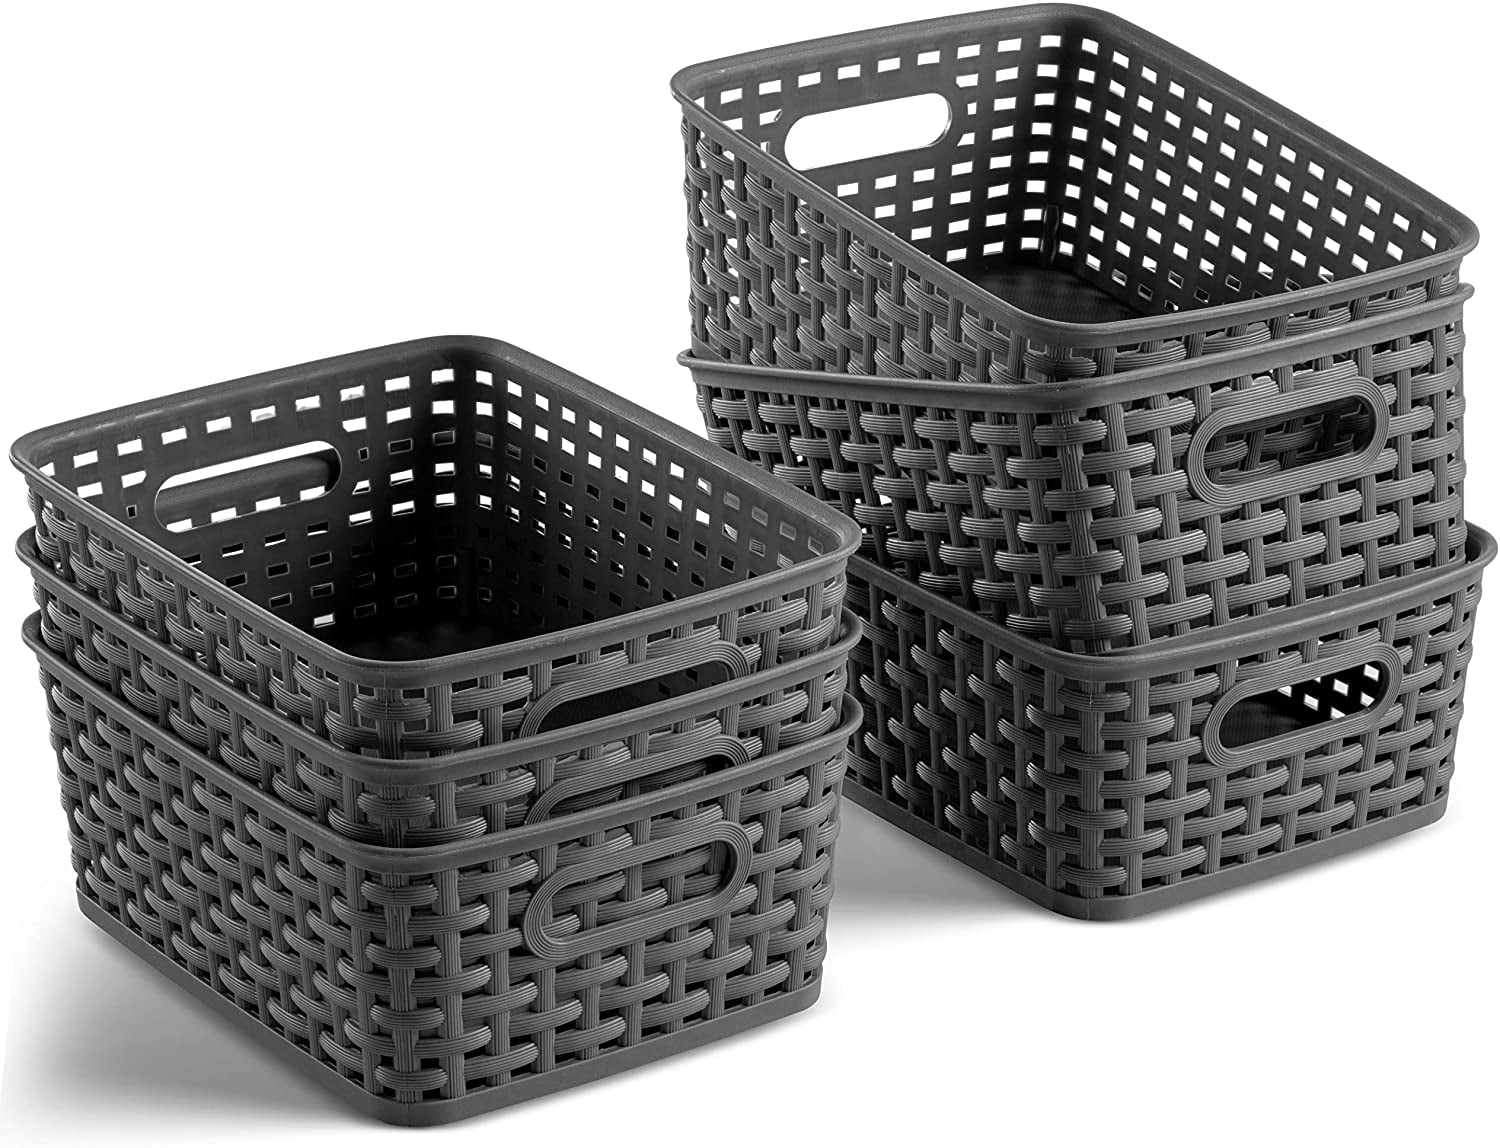 Set of 6 Plastic Storage Baskets - Small Pantry Organizer Basket Bins -  Household Organizers with Cutout Handles for Kitchen Organization,  Countertops, Cabinets, Bedrooms, and Bathrooms 